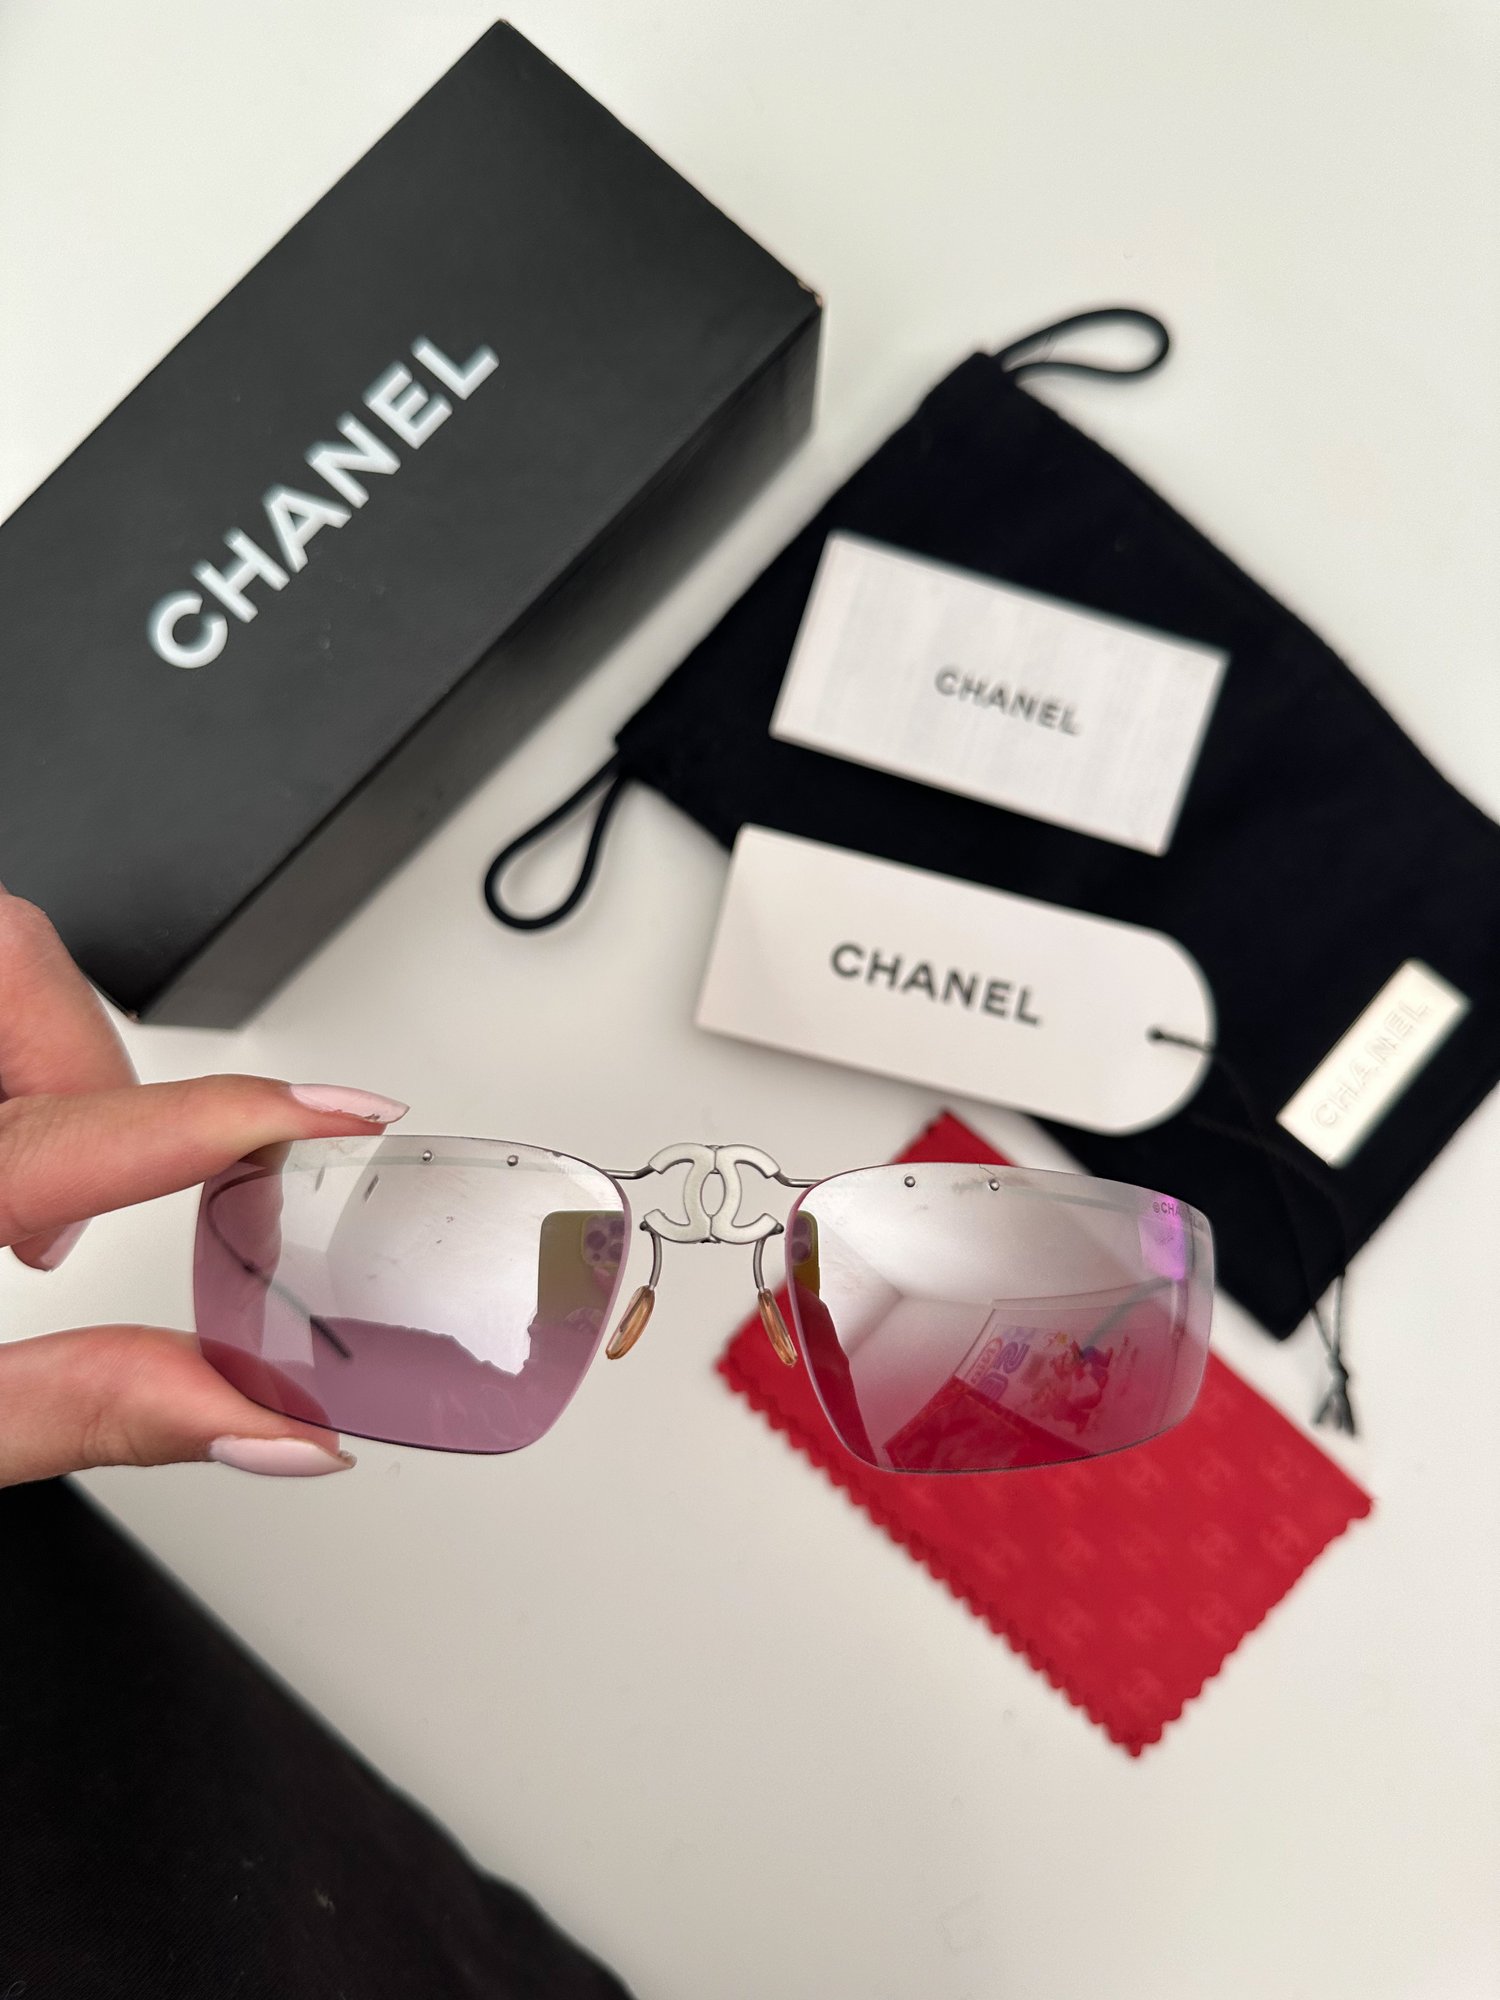 Chanel Rimless Sunglasses - 6 For Sale on 1stDibs  chanel rimless glasses,  chanel rimless sunglasses brown, chanel sunglasses rimless